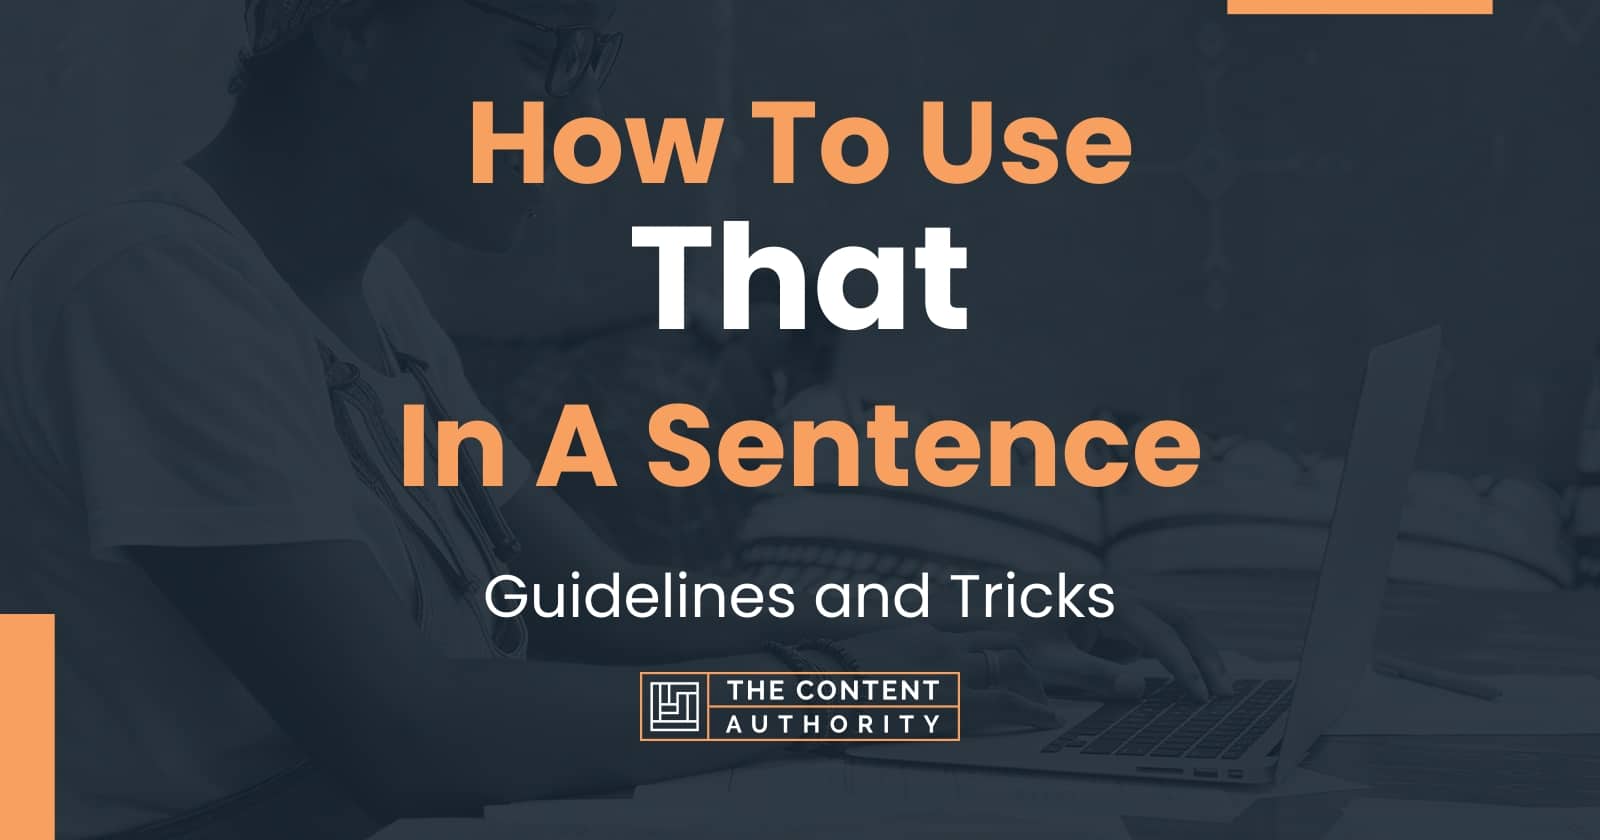 how-to-use-that-in-a-sentence-guidelines-and-tricks